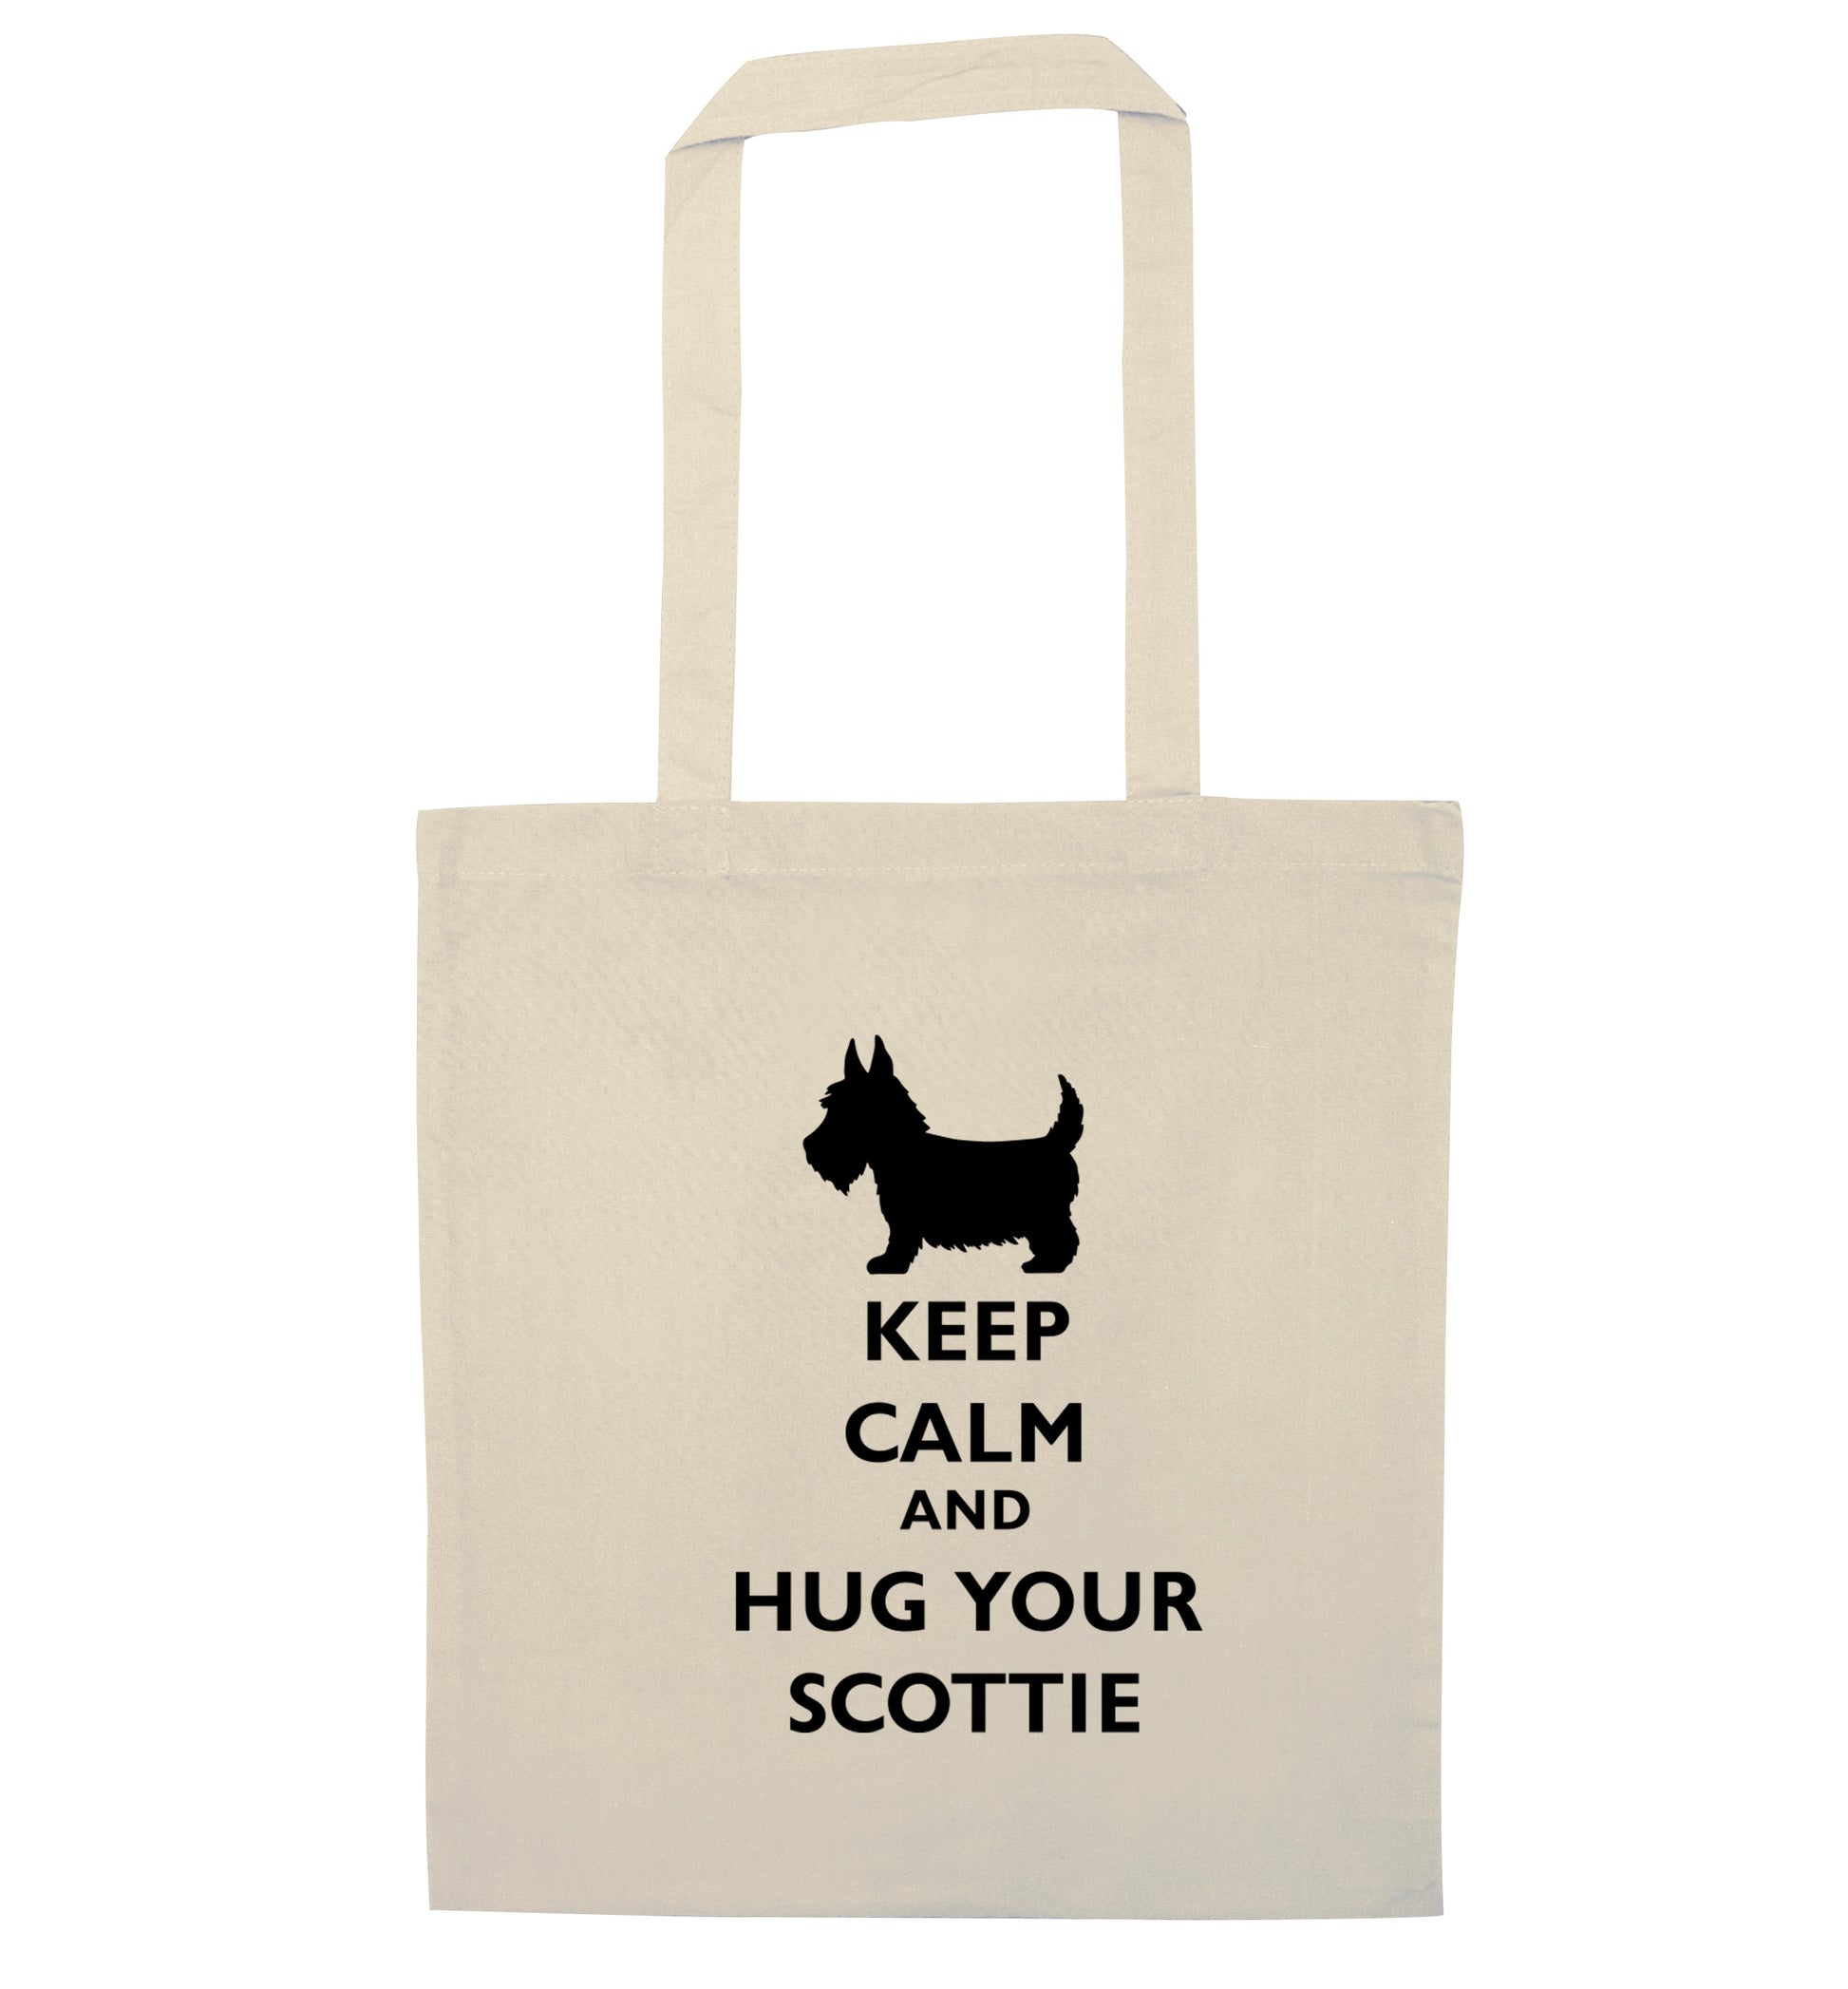 Keep calm and hug your scottie natural tote bag